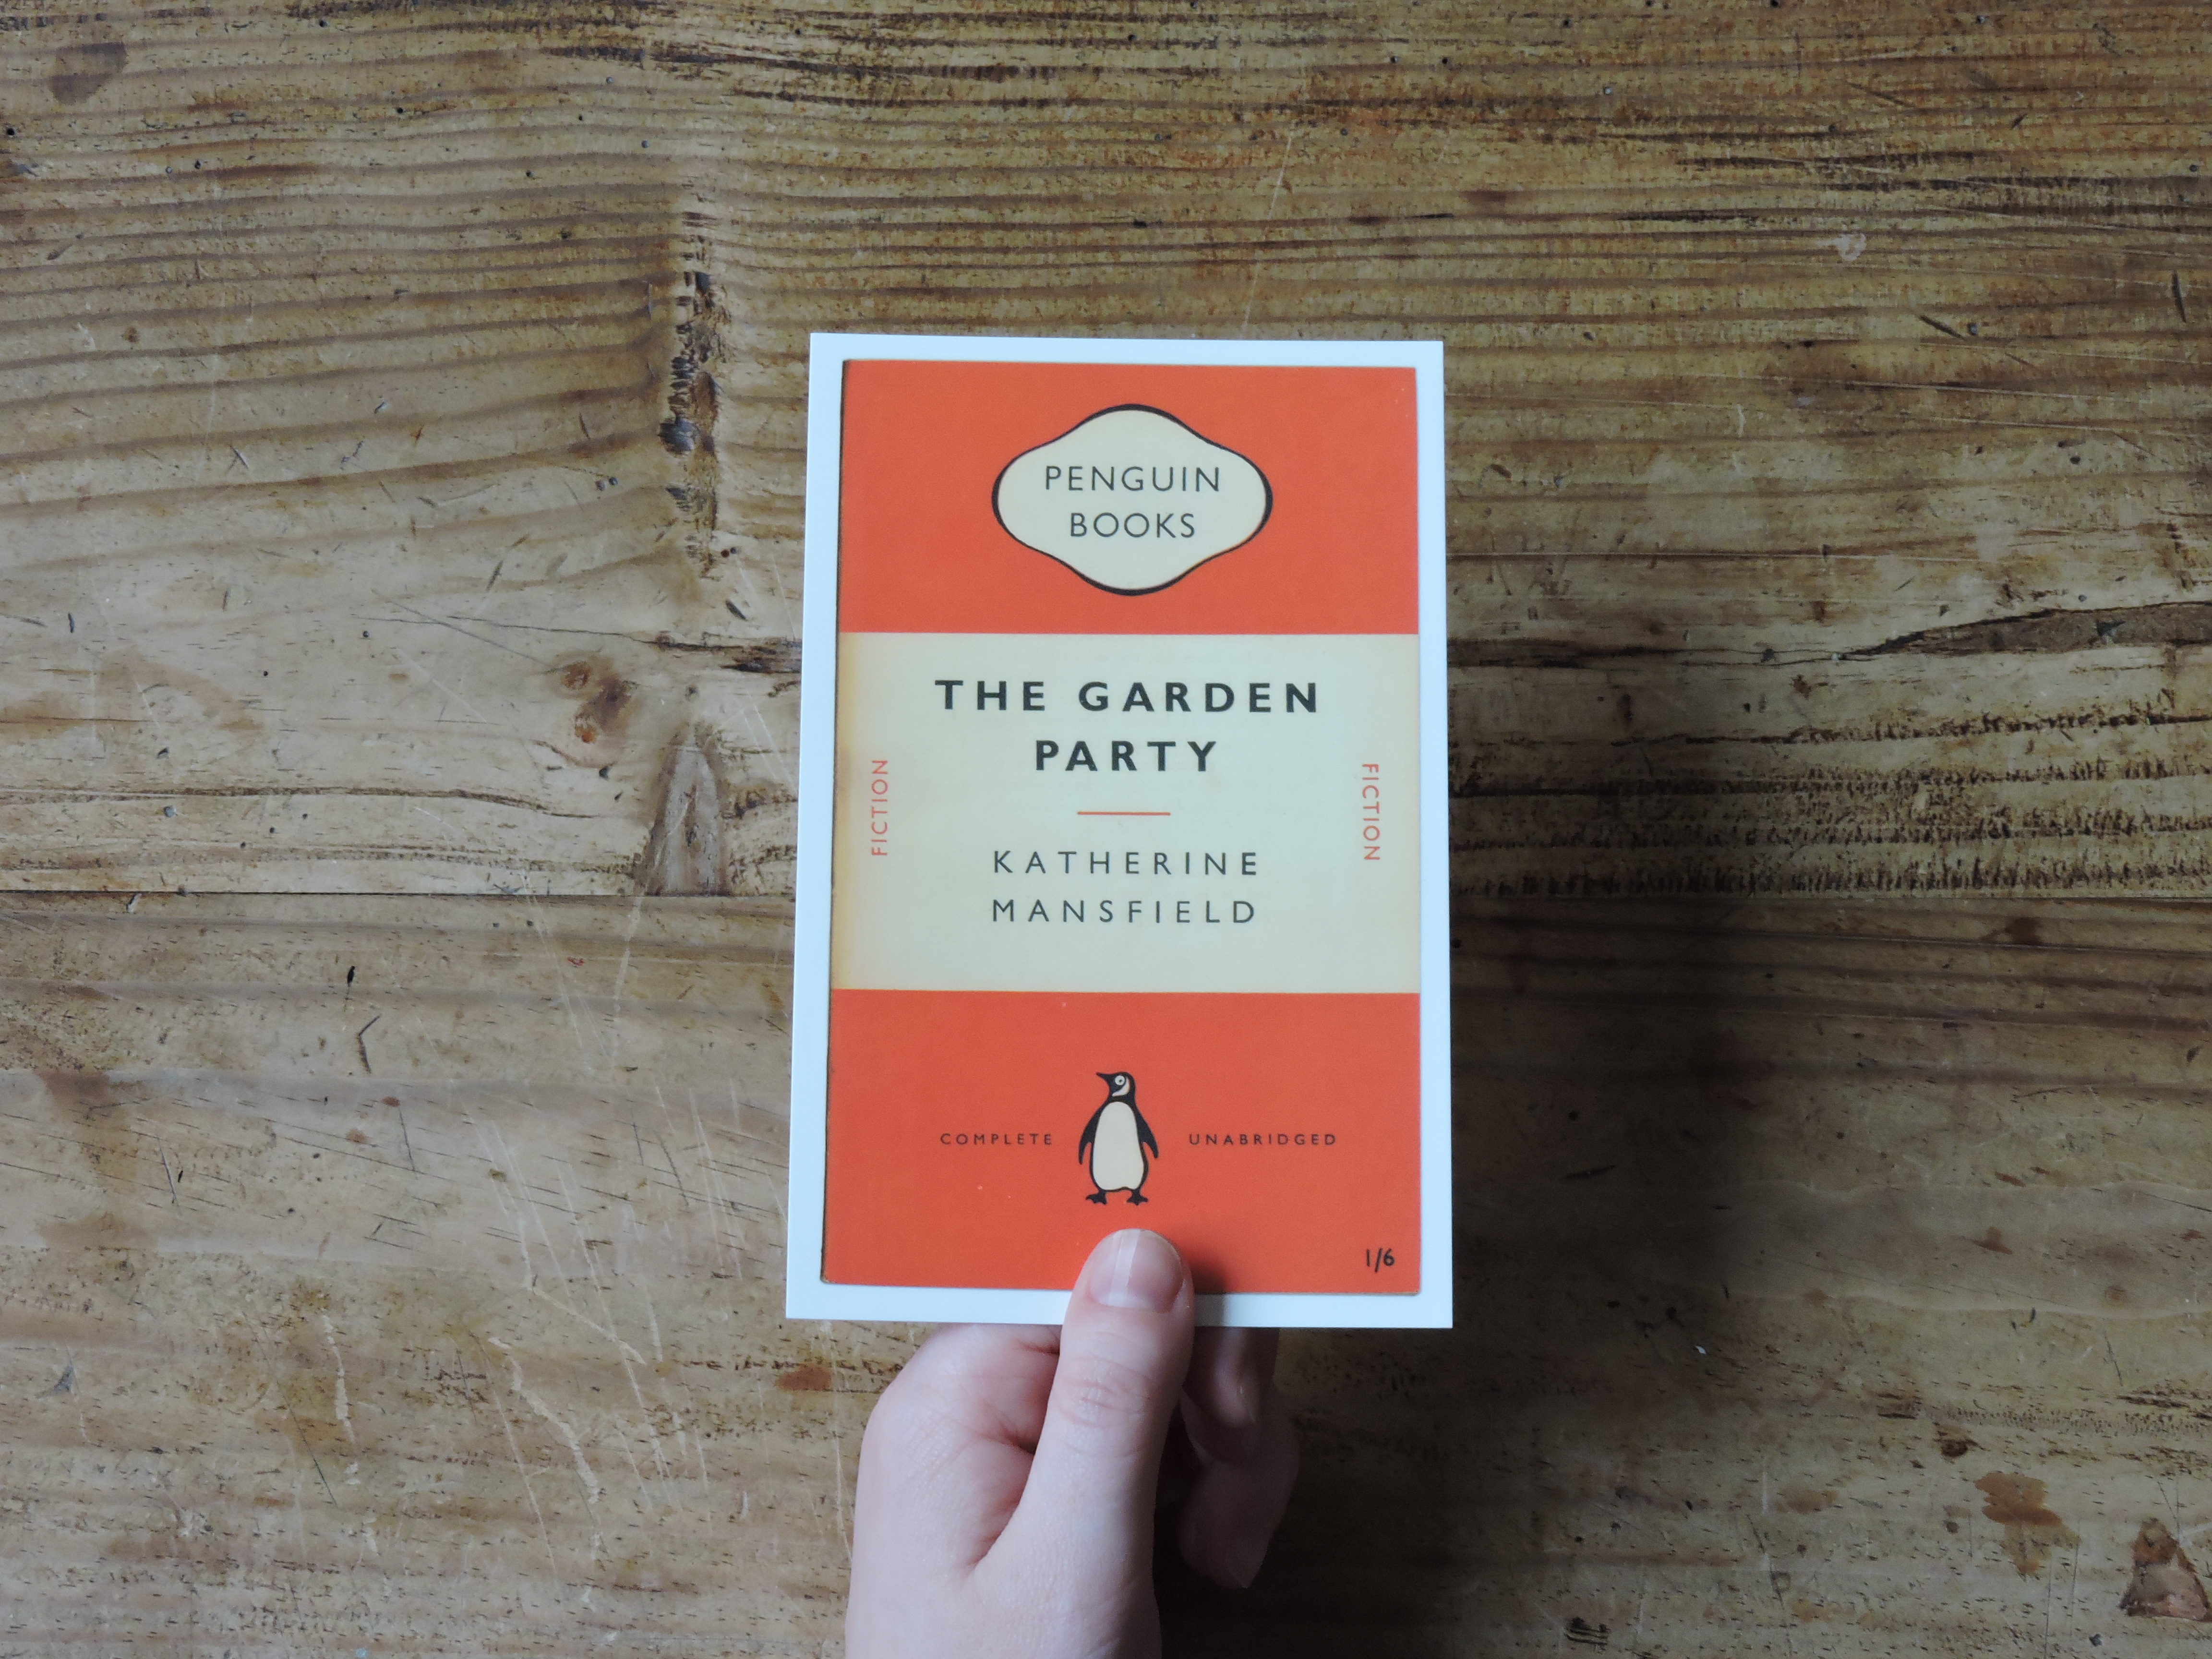 The Garden Party by Katherine Mansfield